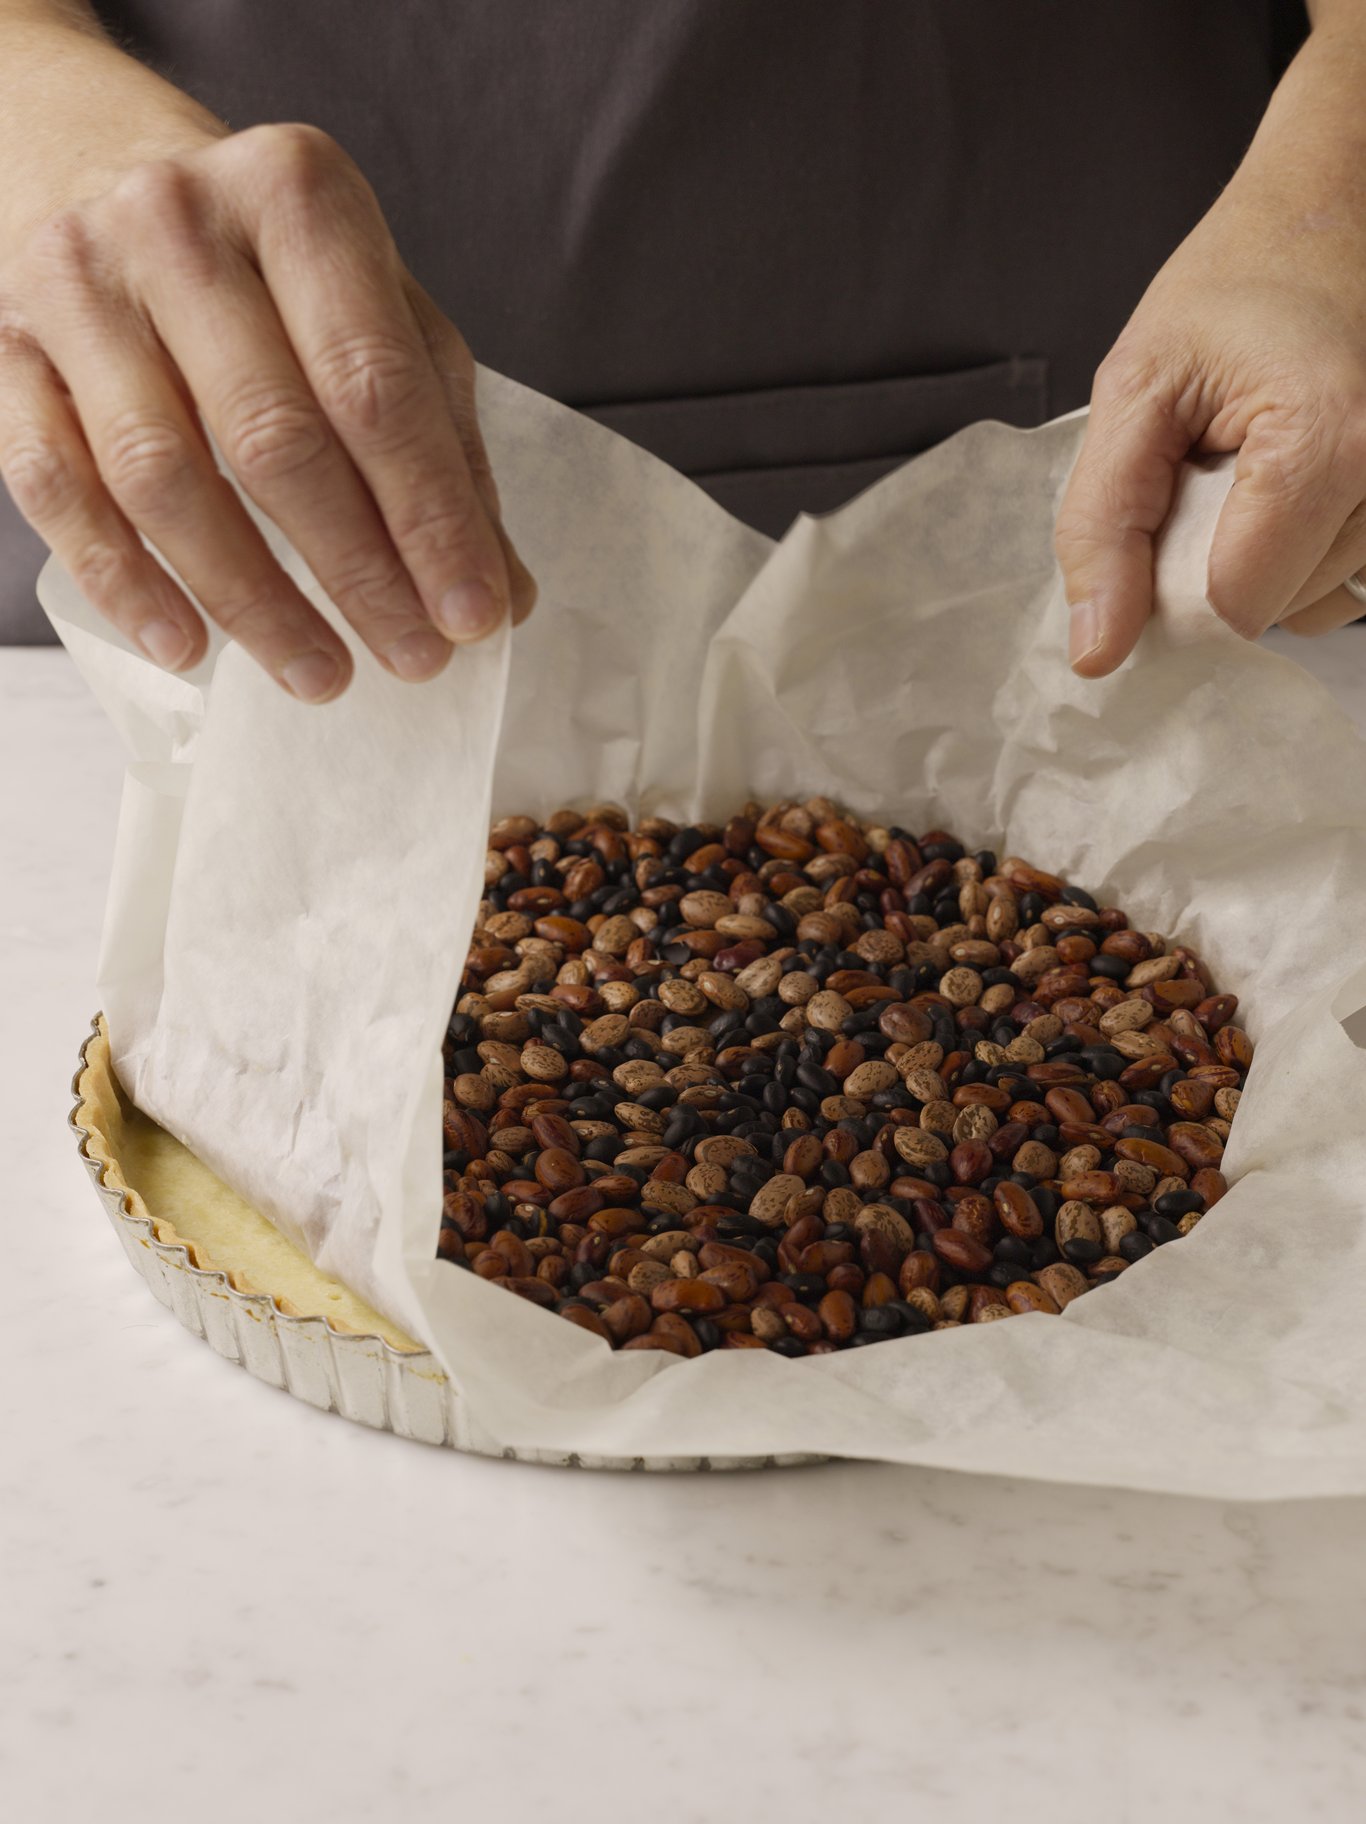 Removing pie beans from a baked tart shell.